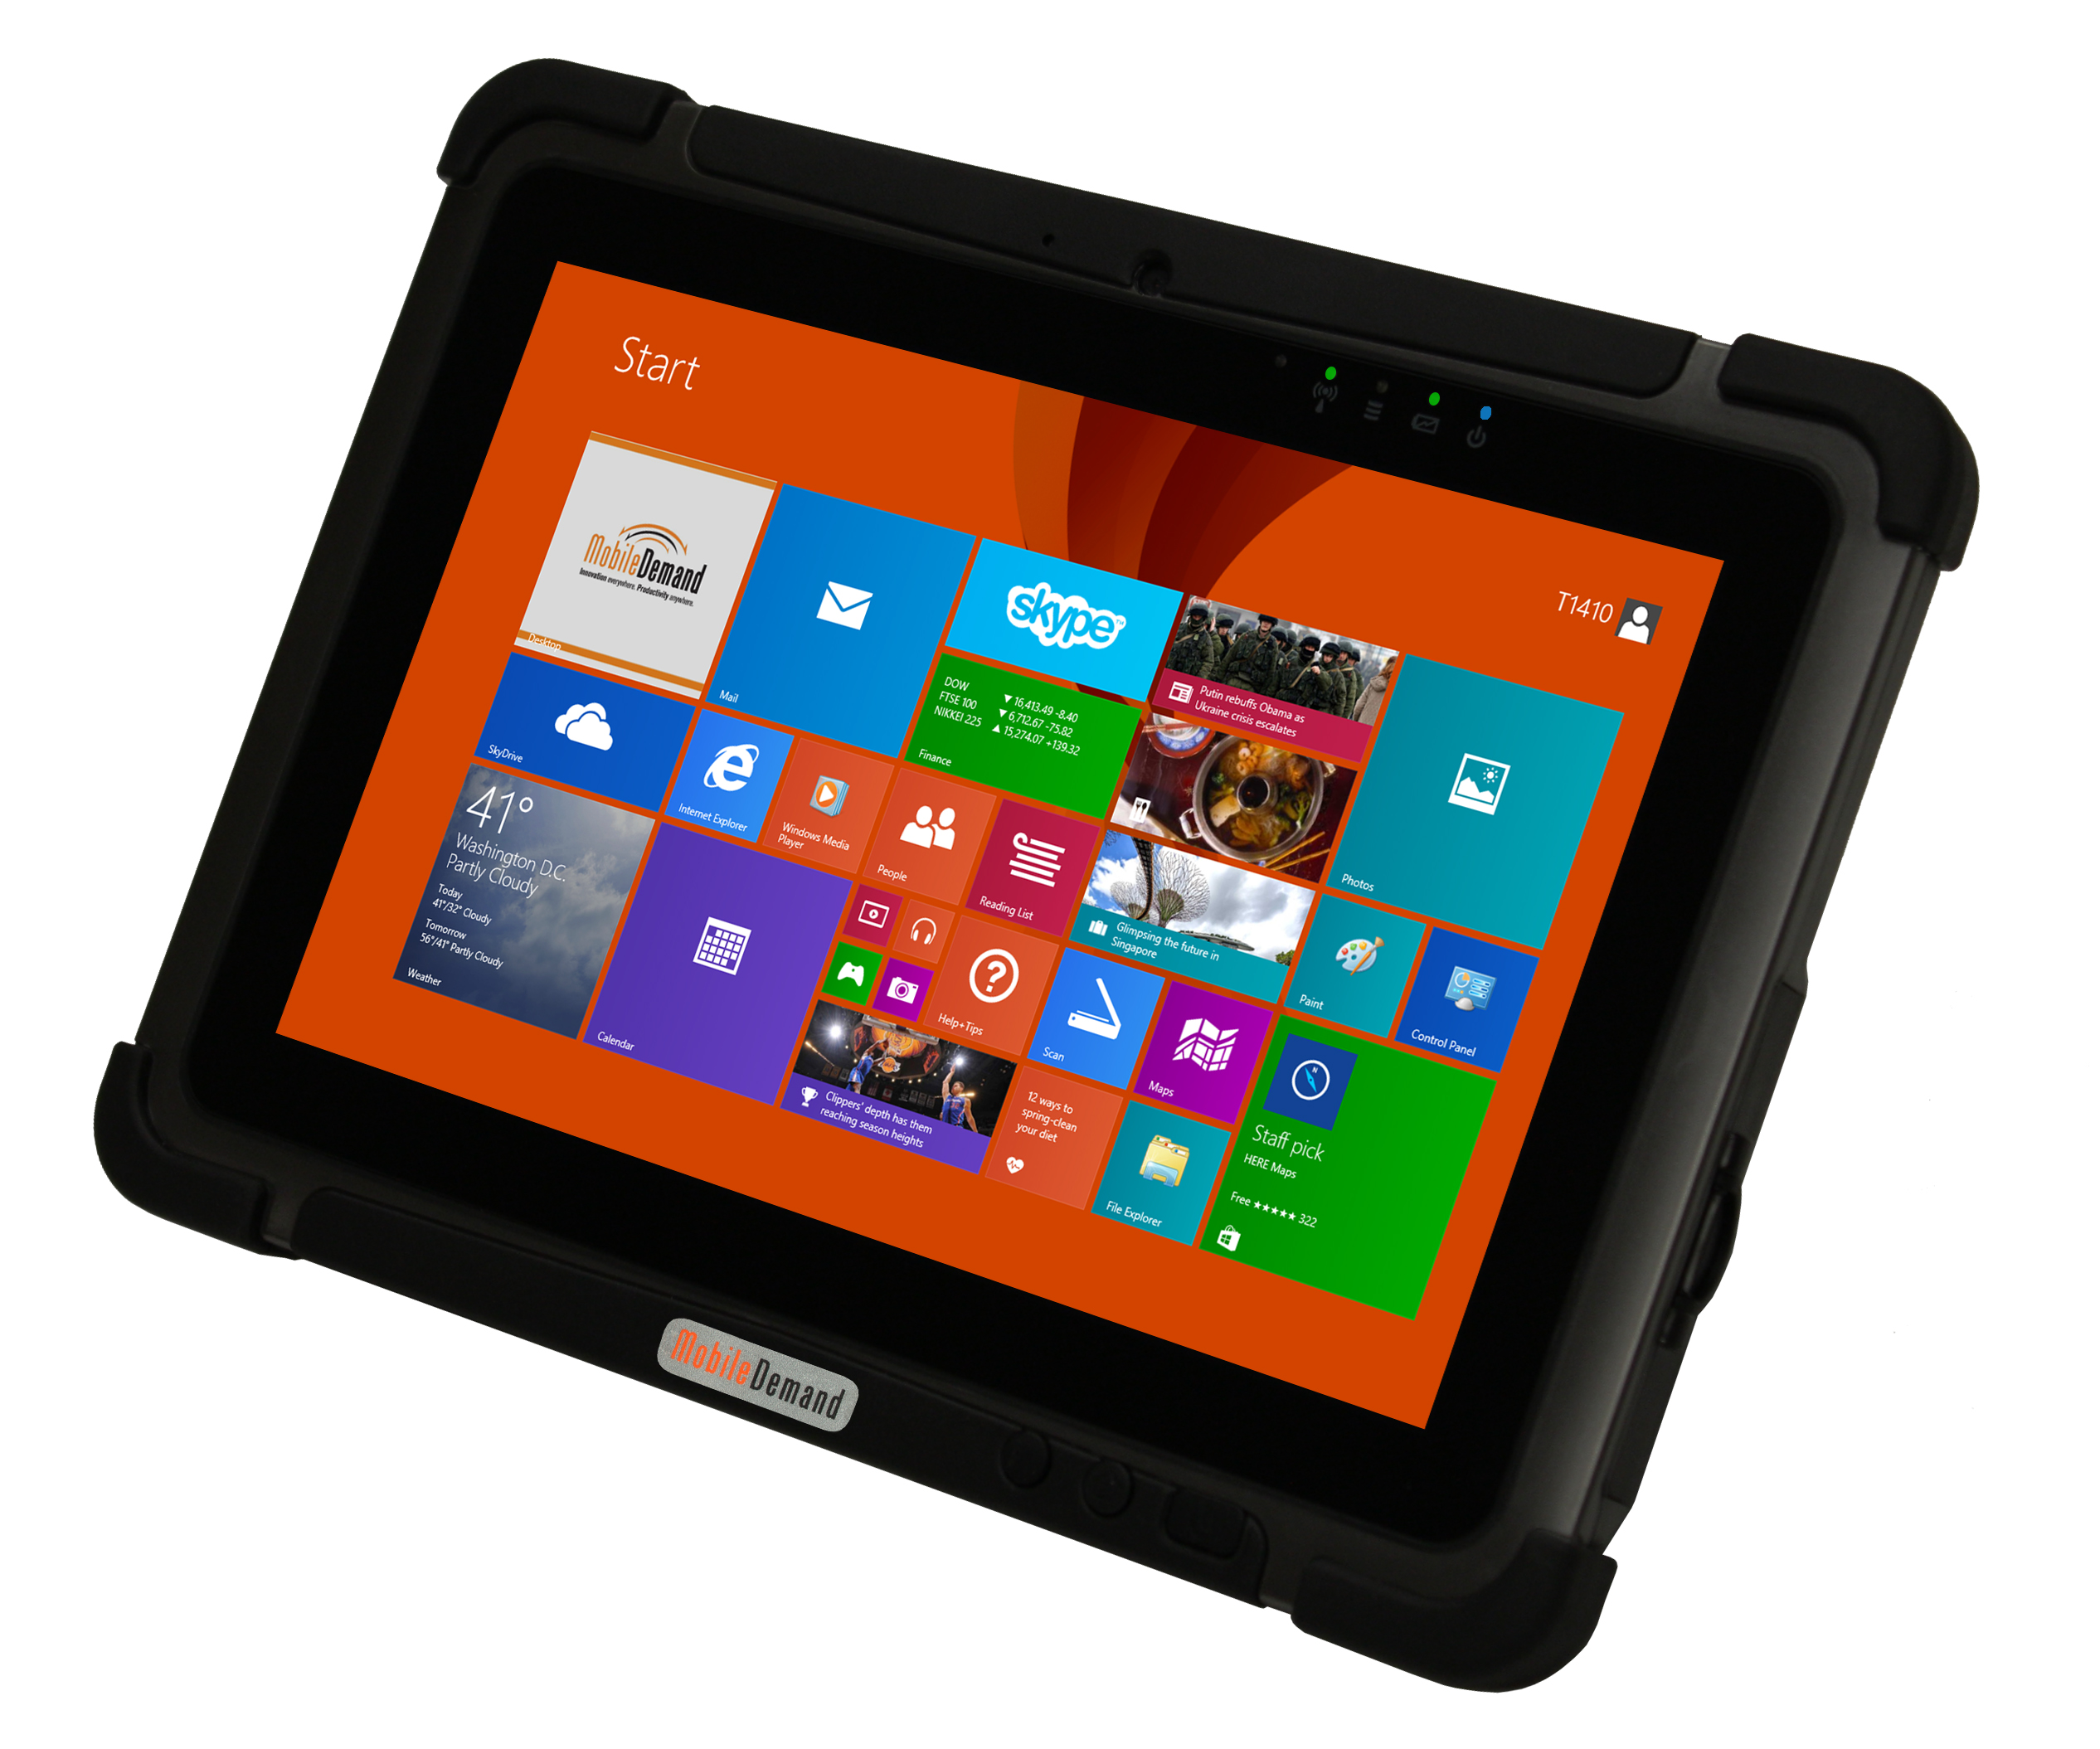 mobiledemand-announces-extra-long-life-battery-for-the-xtablet-t1400